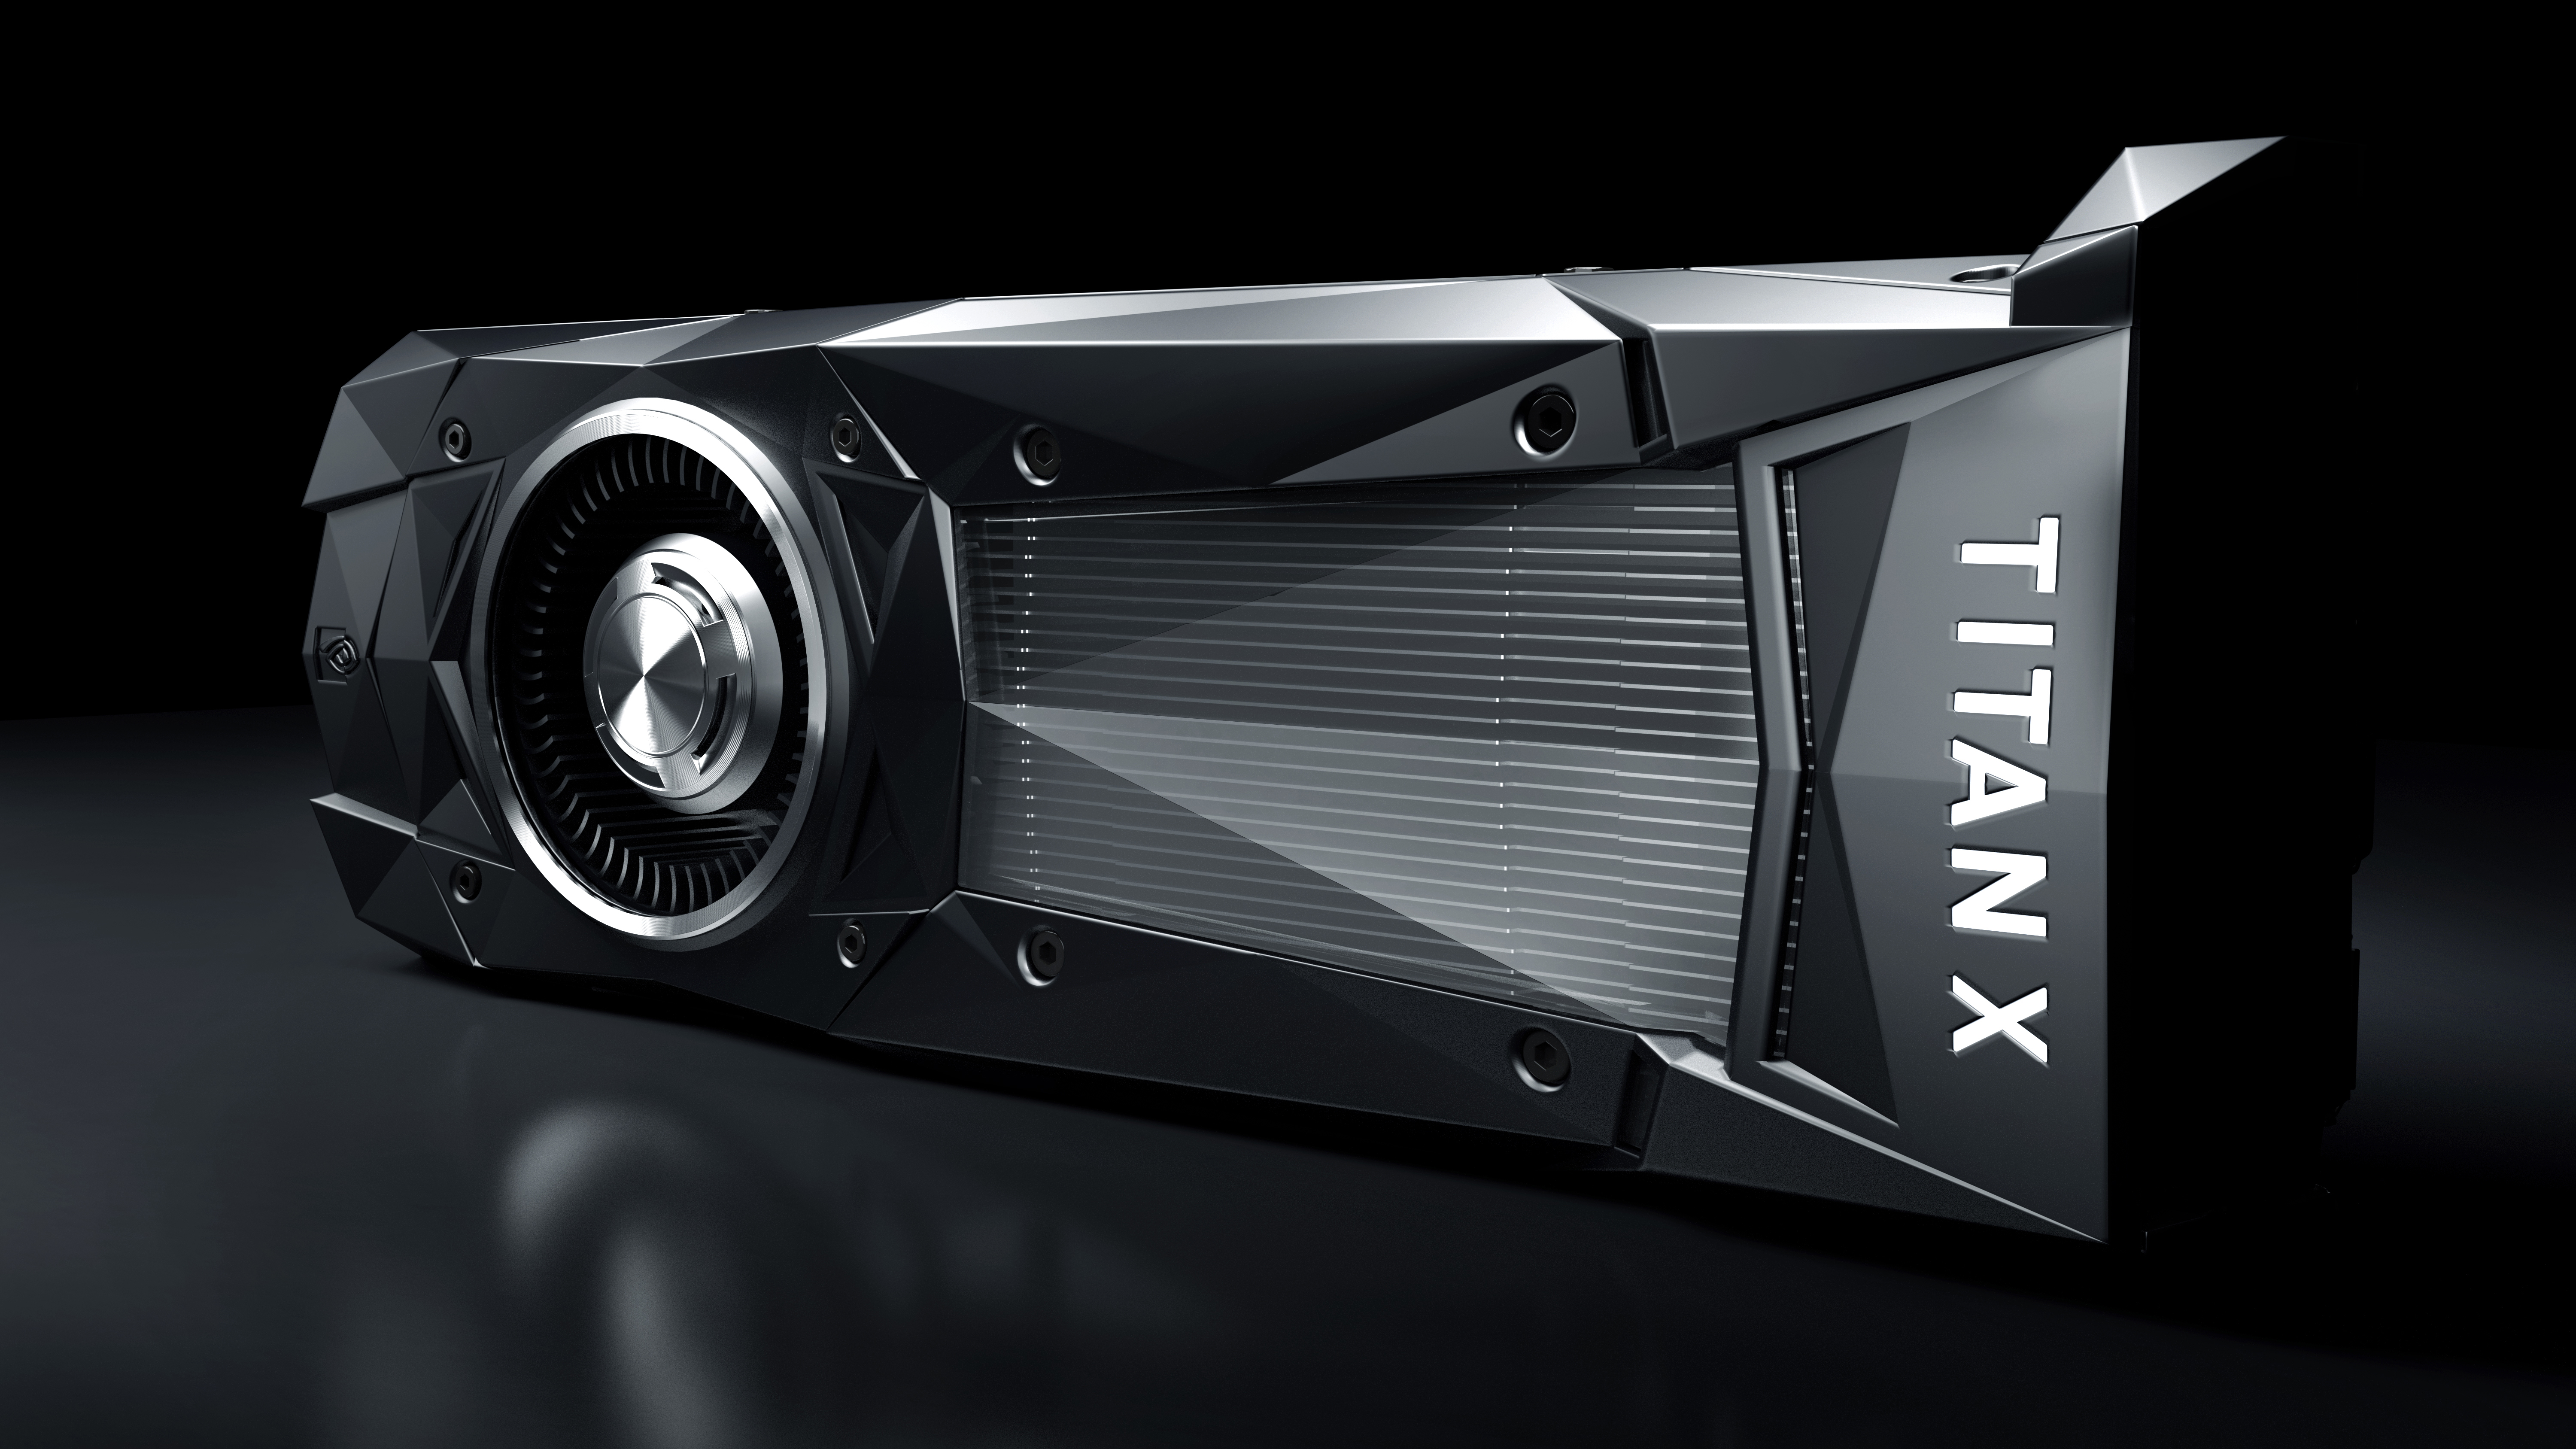 Nvidia Titan Xp is the new-new king of 